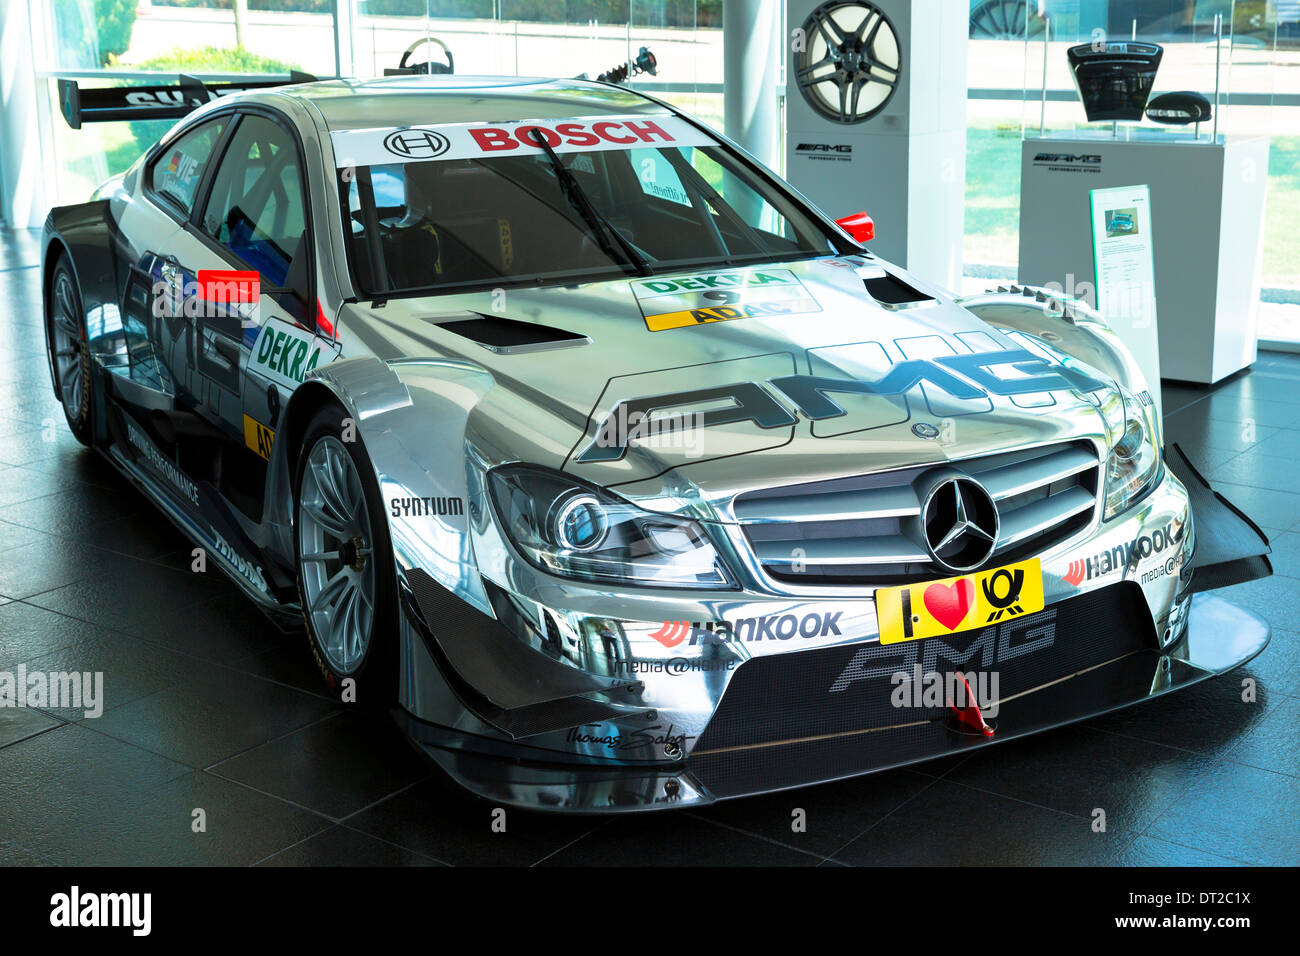 DTM Mercedes-AMG C-Coupe 2013 race car on display in showroom at engine factory in Affalterbach, Germany Stock Photo